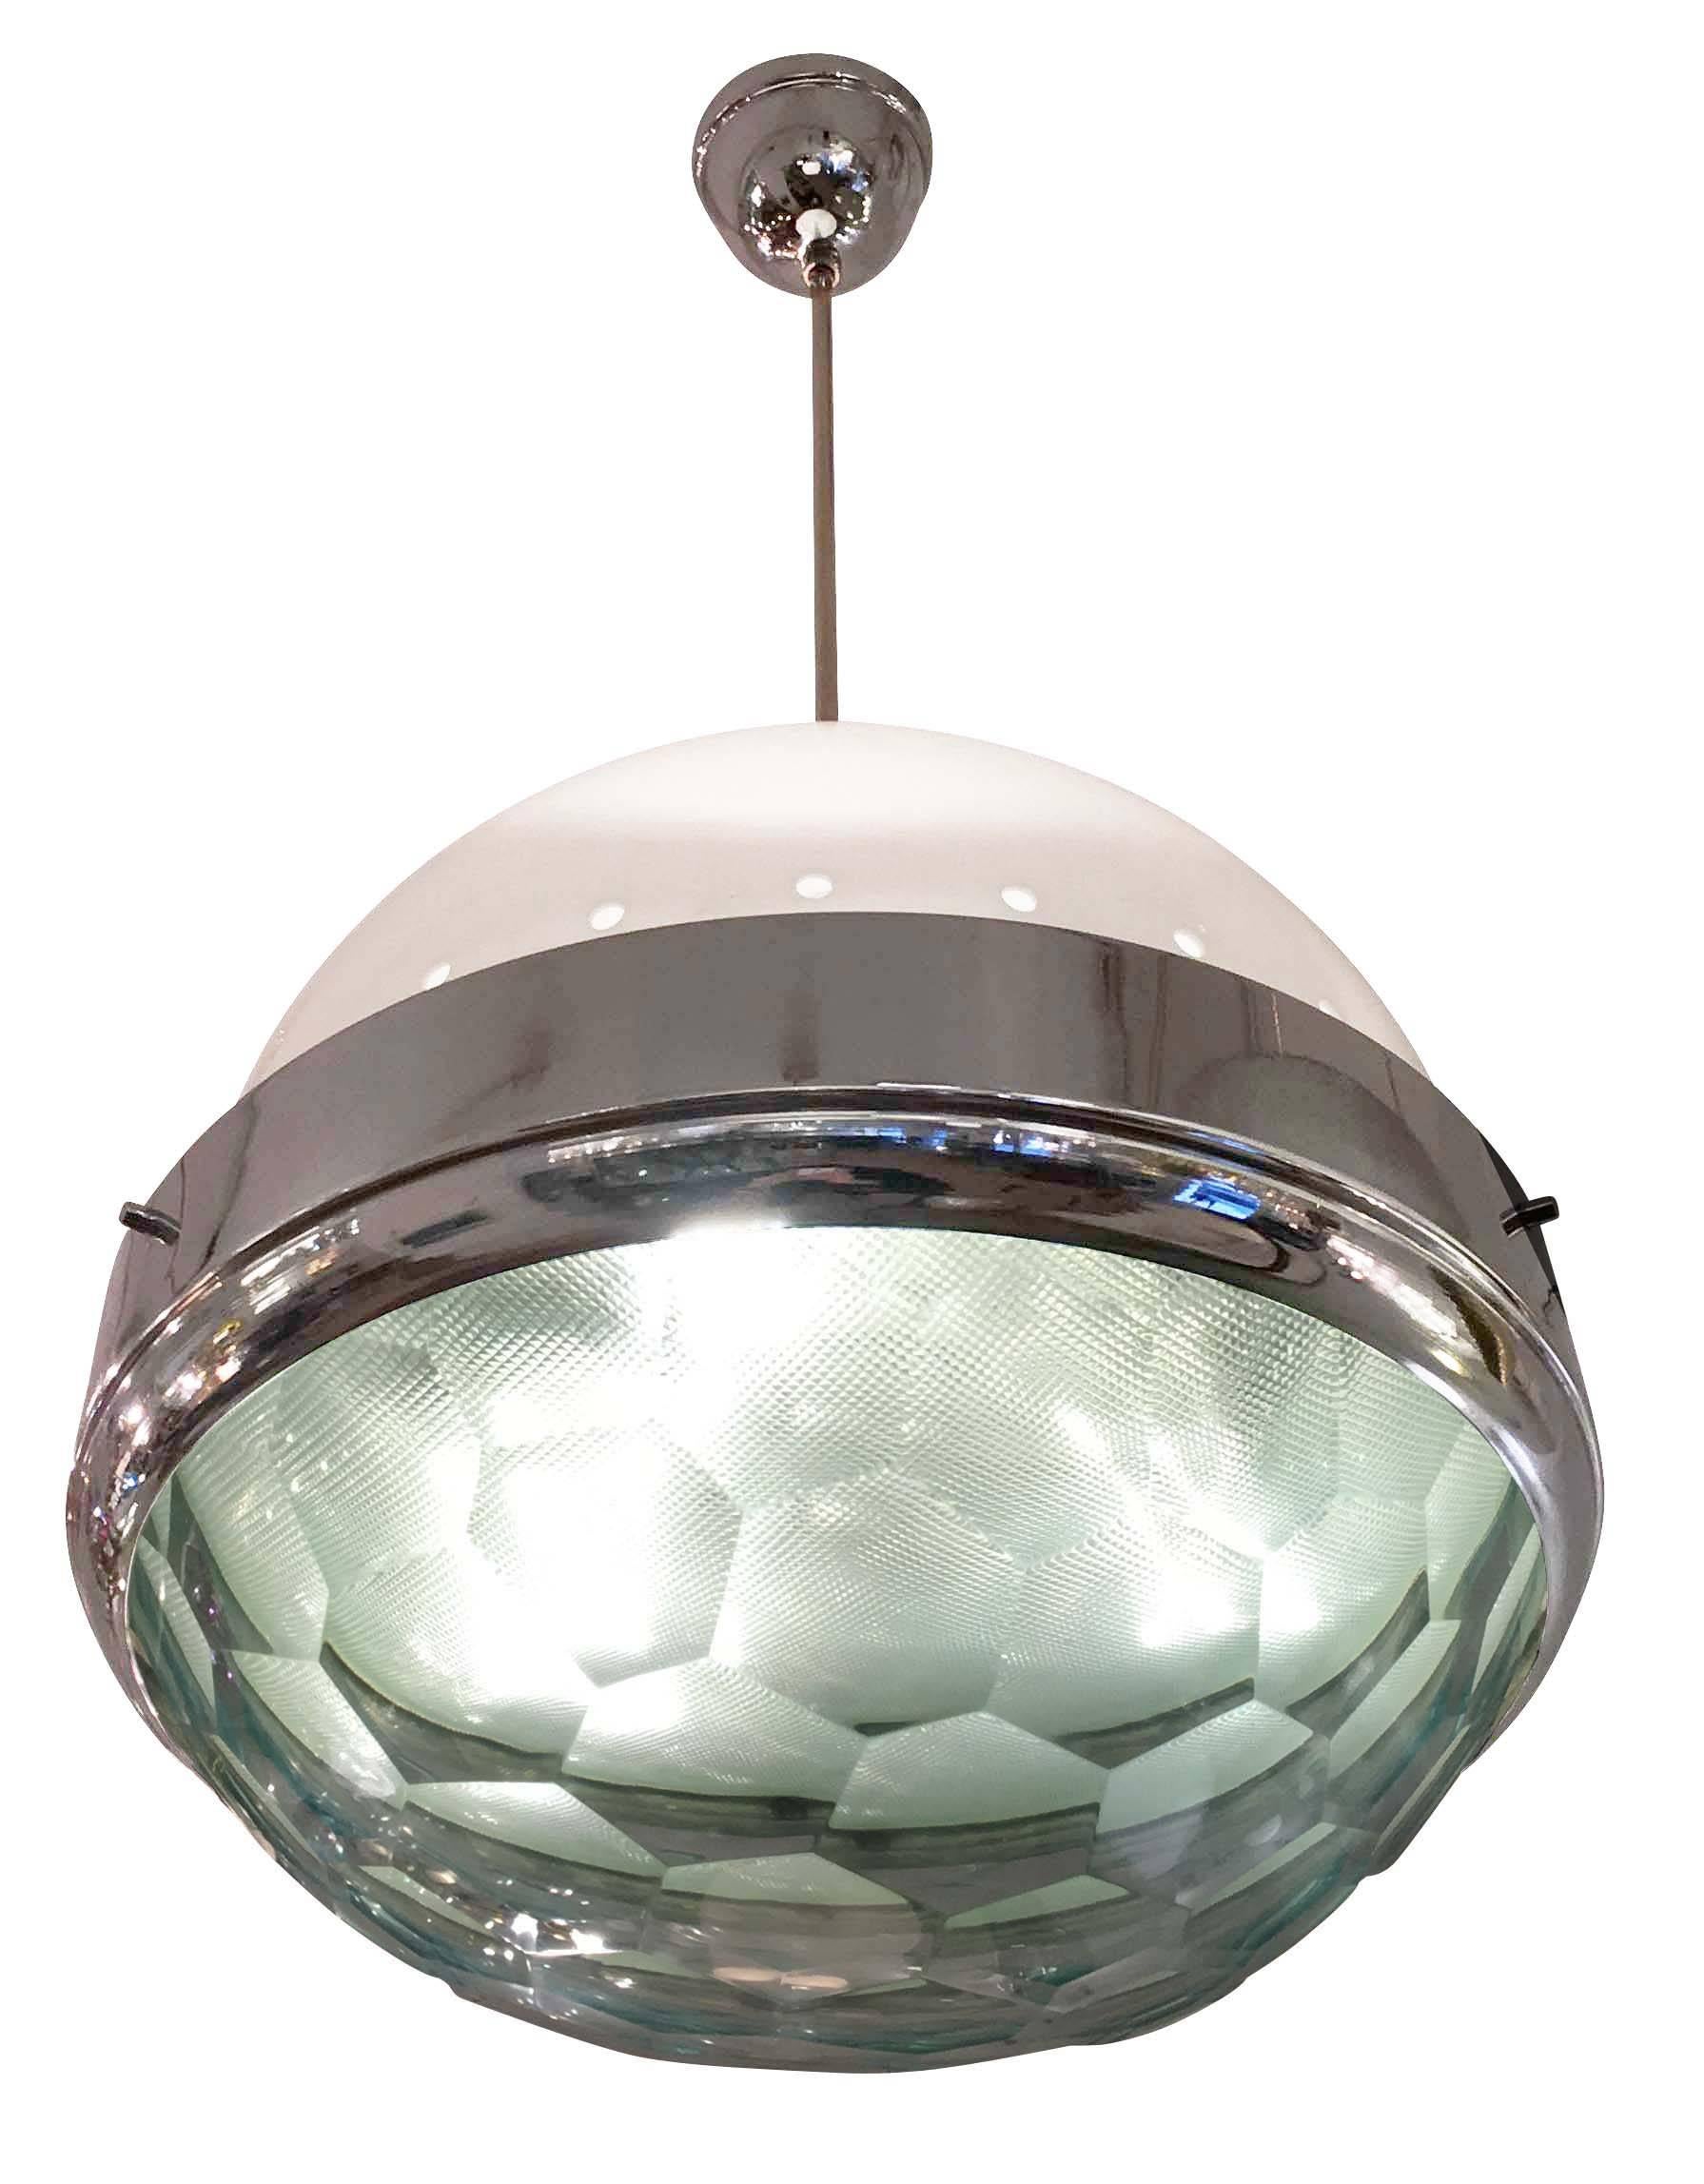 Italian Large Faceted Lens Pendant Attributed to Lumi, Italy, 1960s